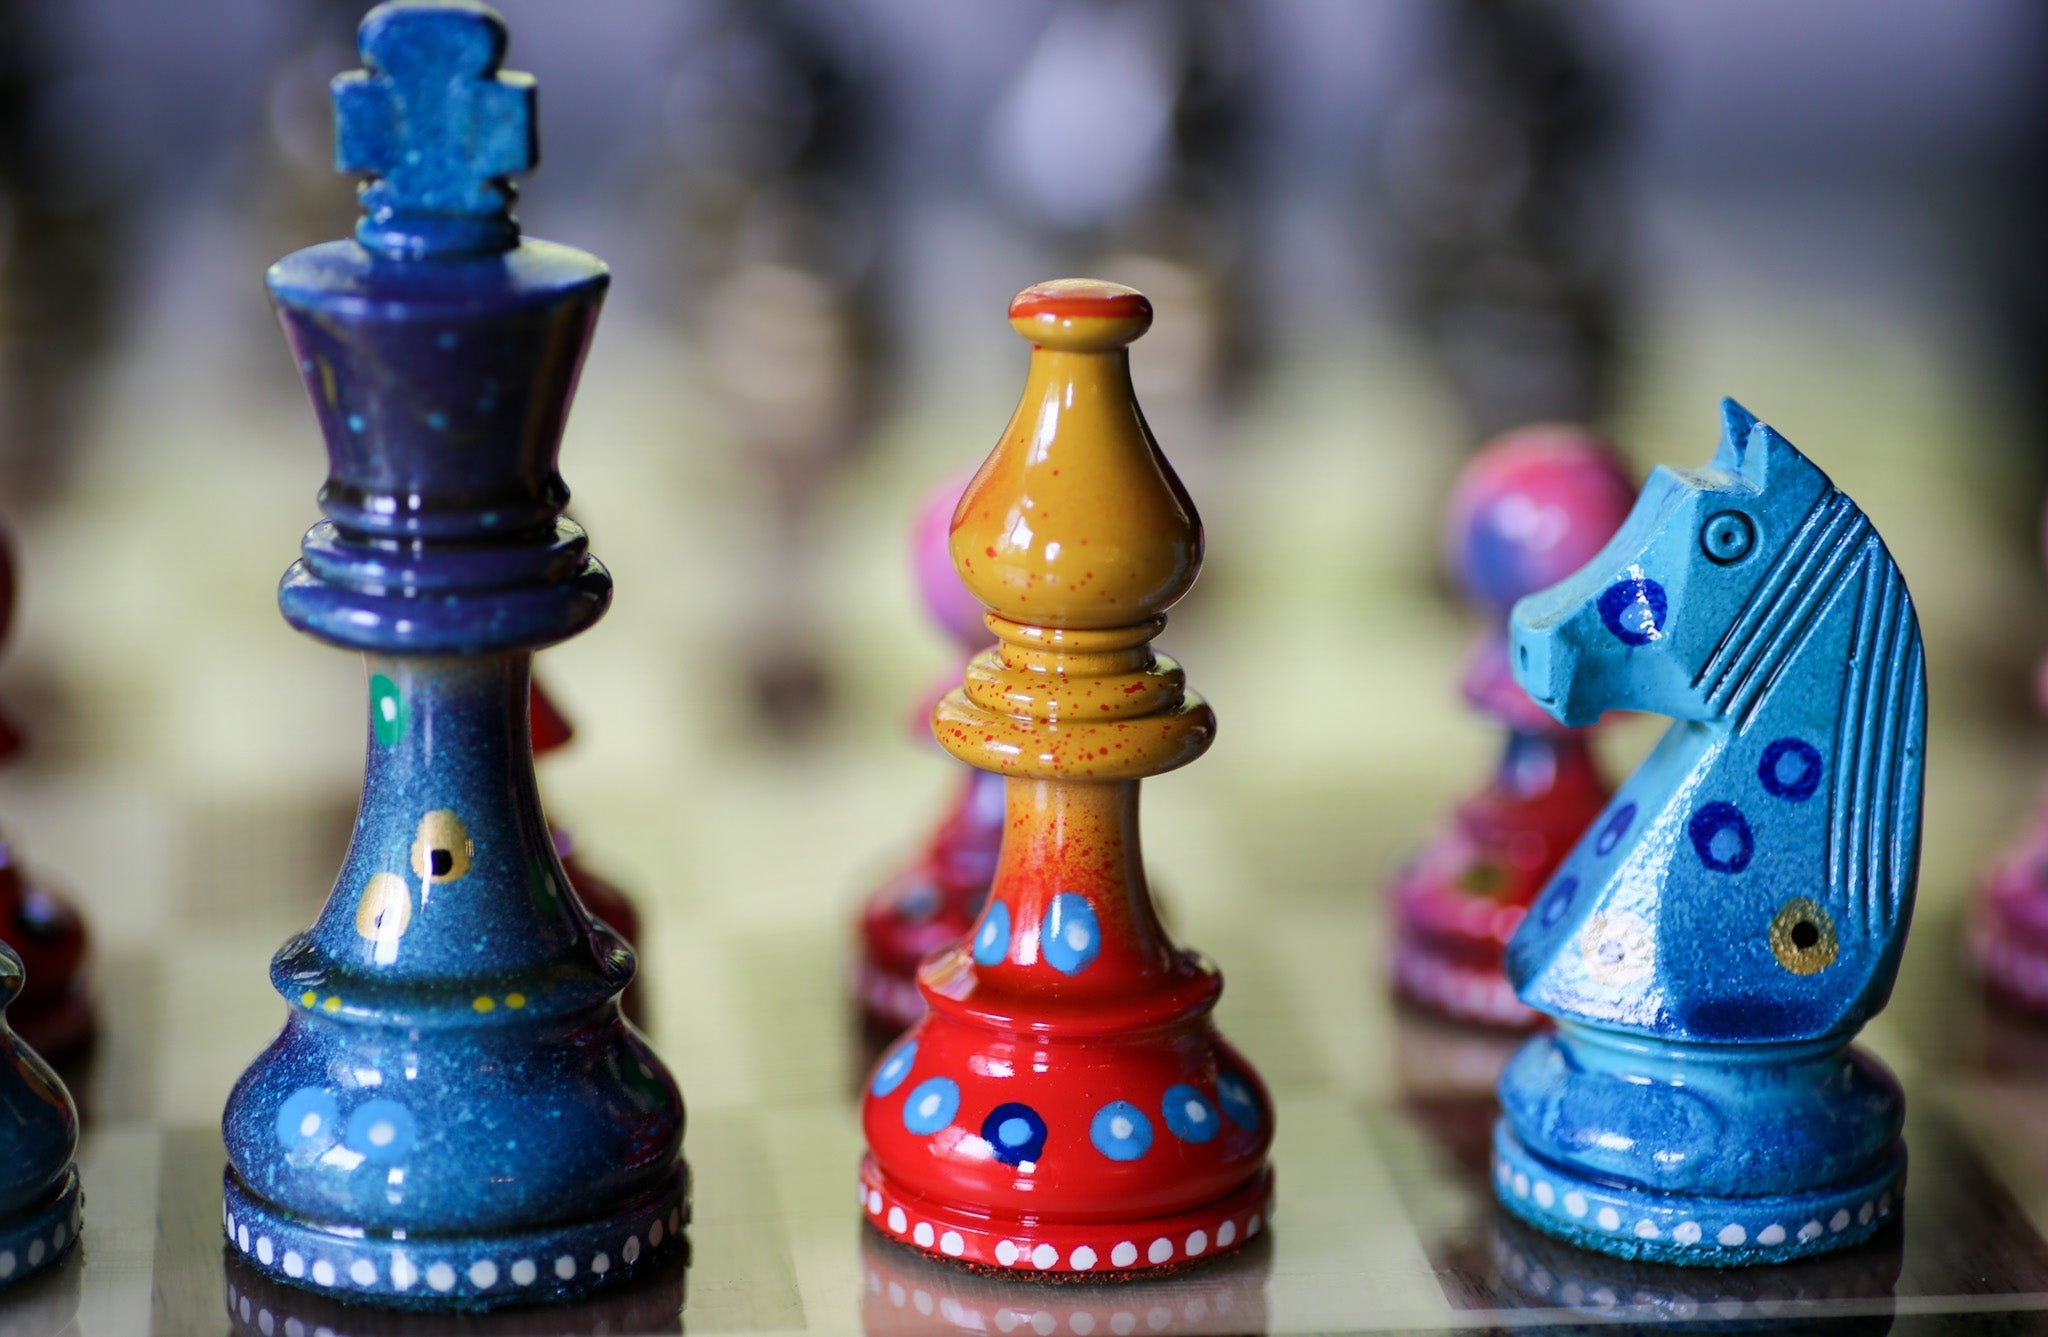 The Crowd-Pleaser - Sydney Gruber Painted Champions Chess Set #5 - Chess Set - Chess-House